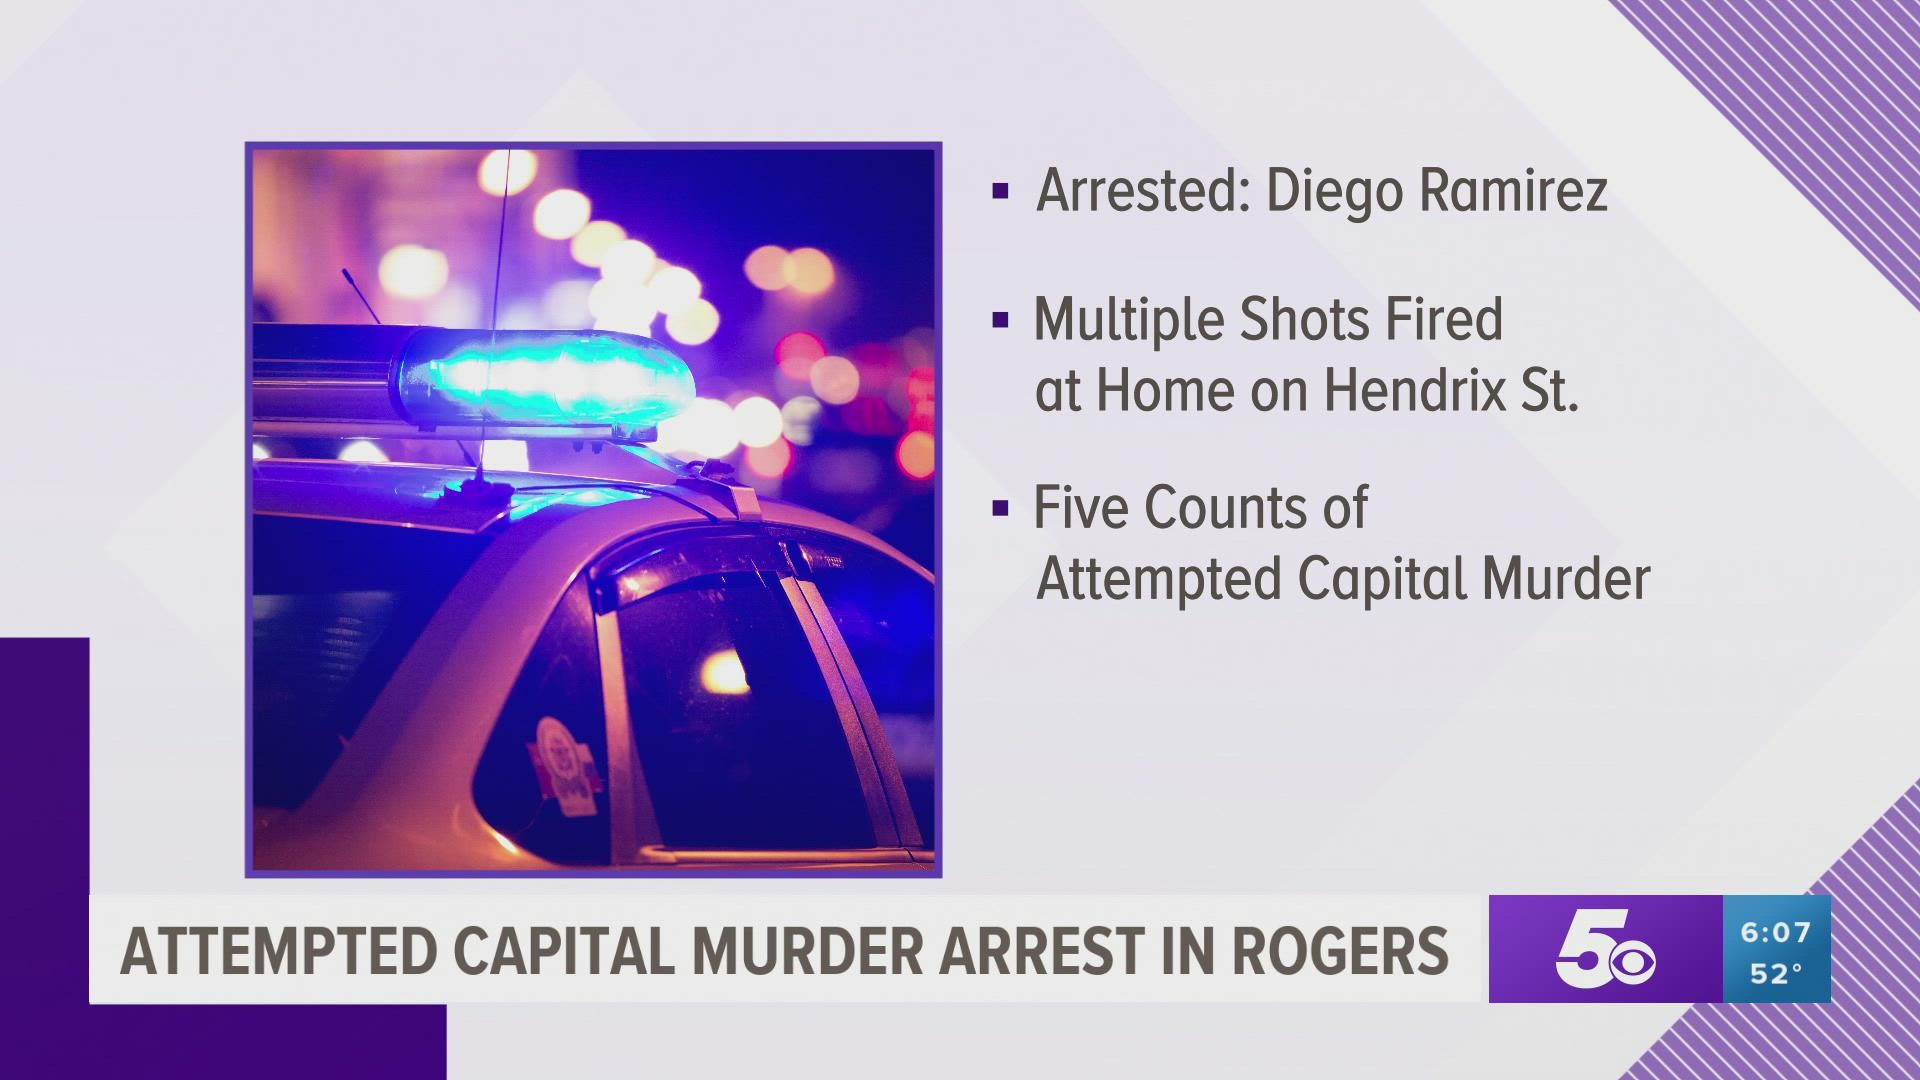 Diego Ramirez is facing multiple charges, including five counts of attempted capital murder, in connection to a shooting in Rogers.